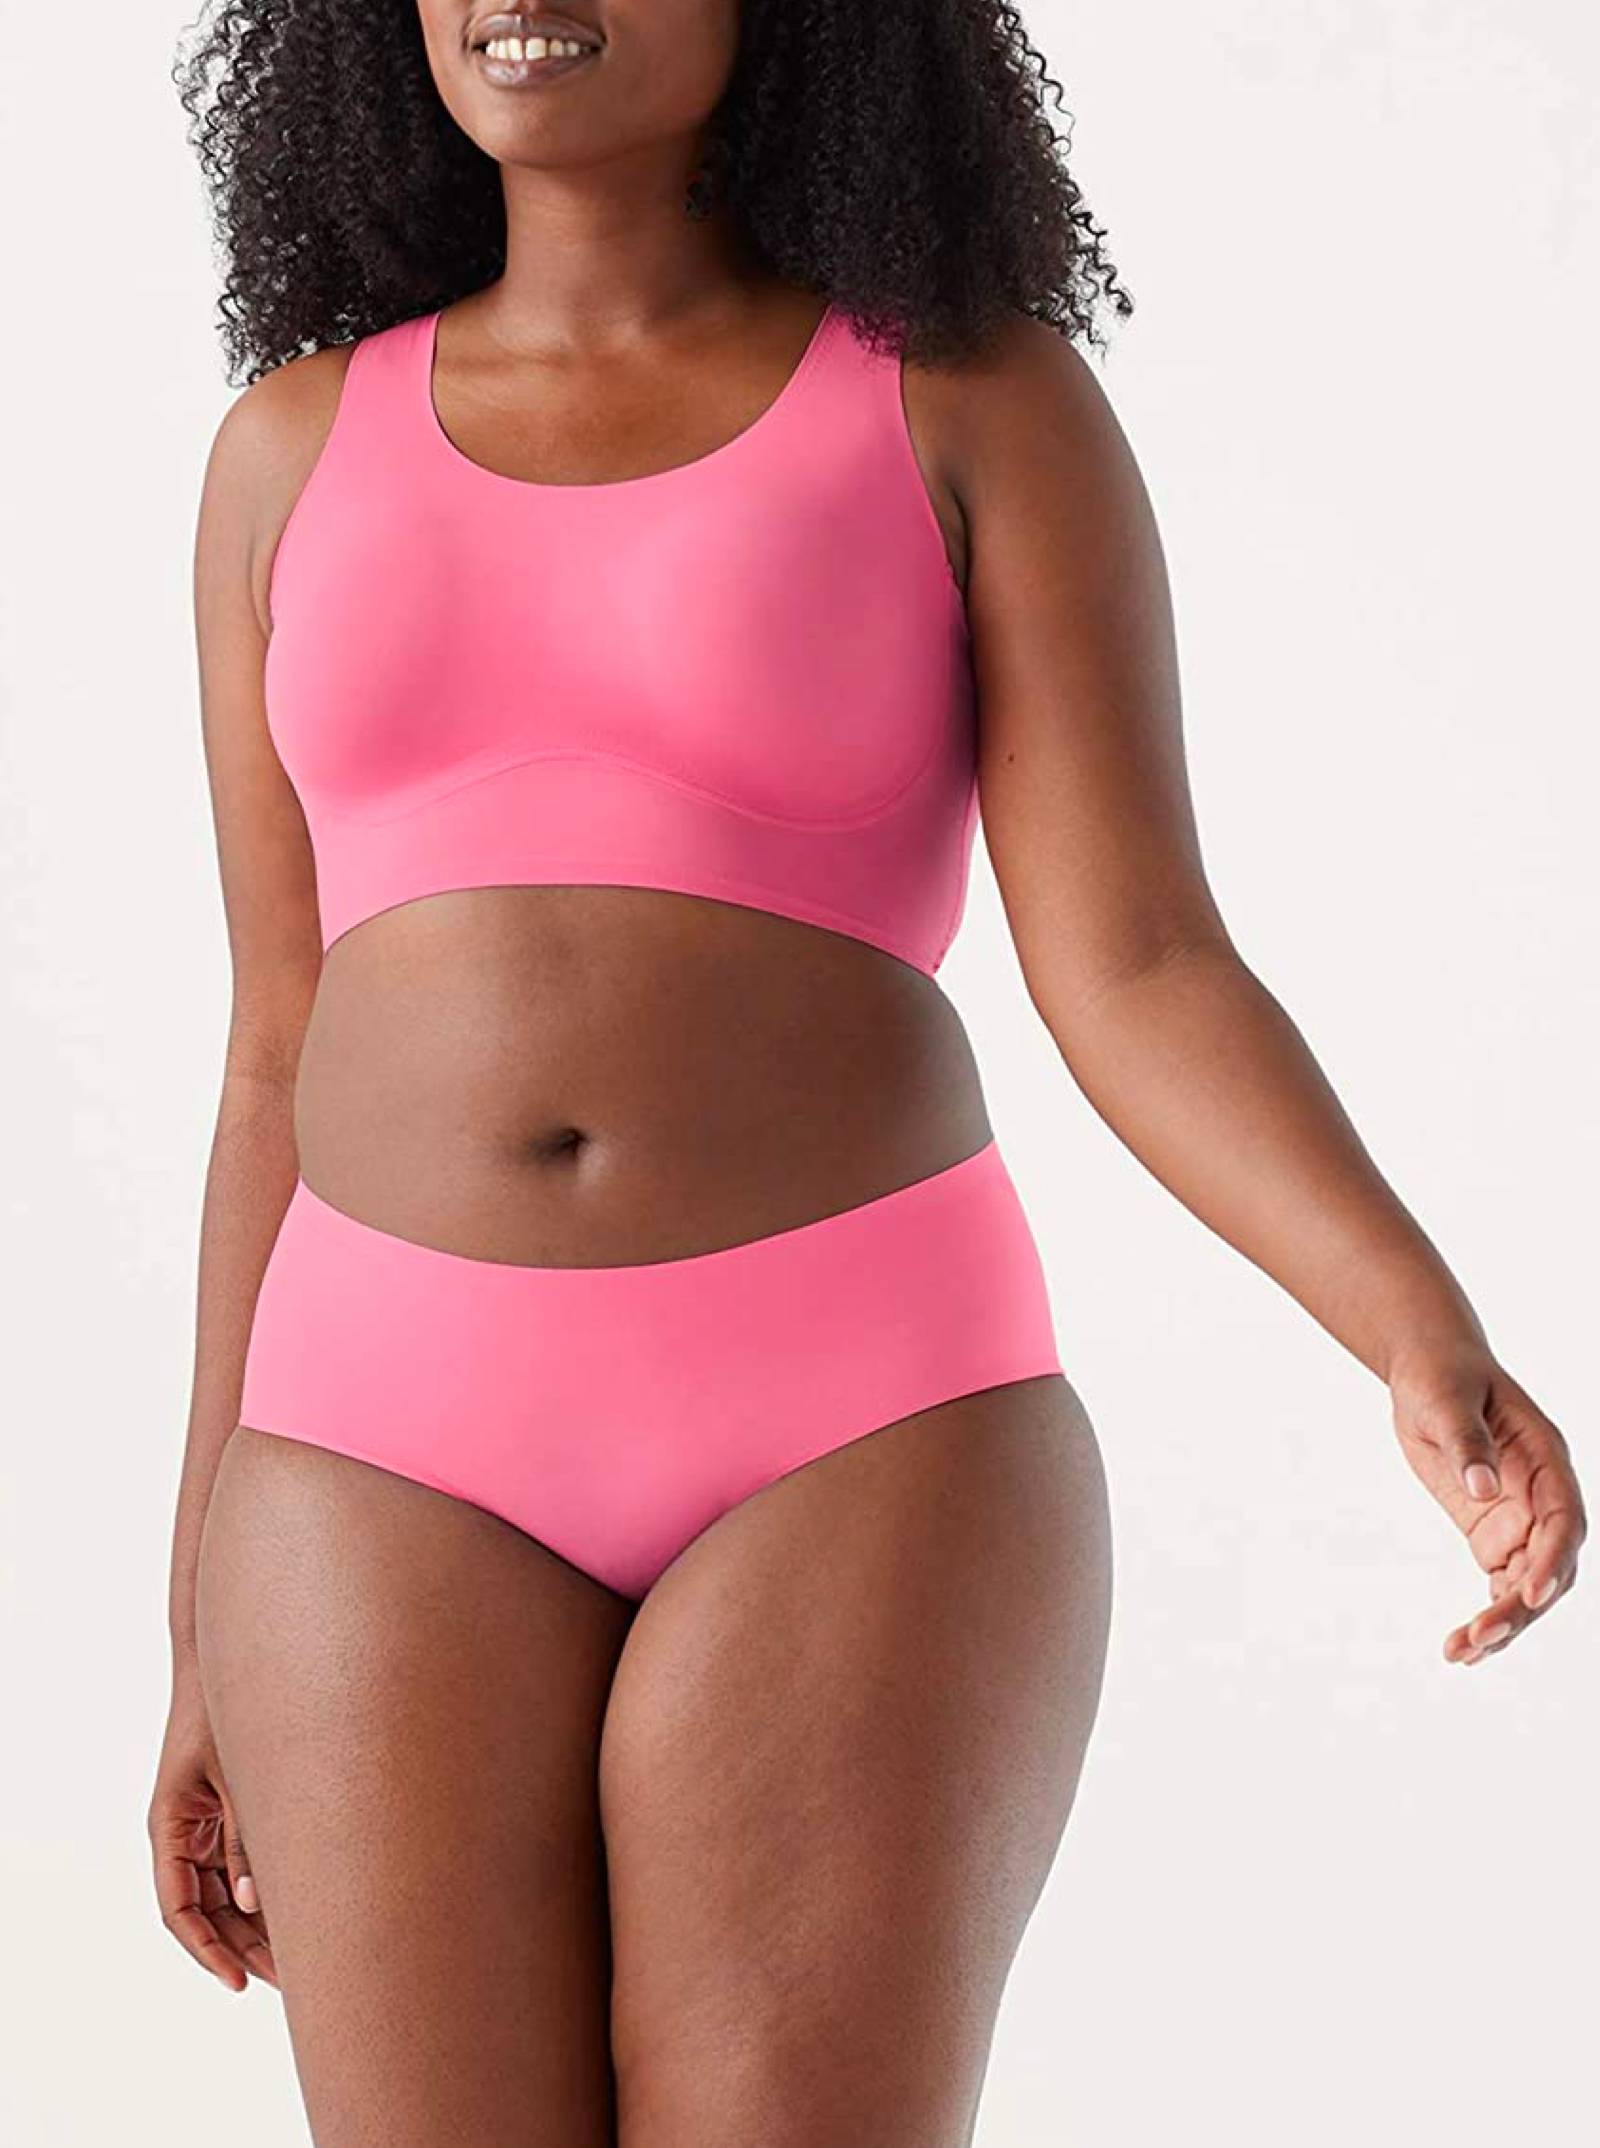 5 Reasons Why You Need To Switch To Seamless Underwear – Fashion